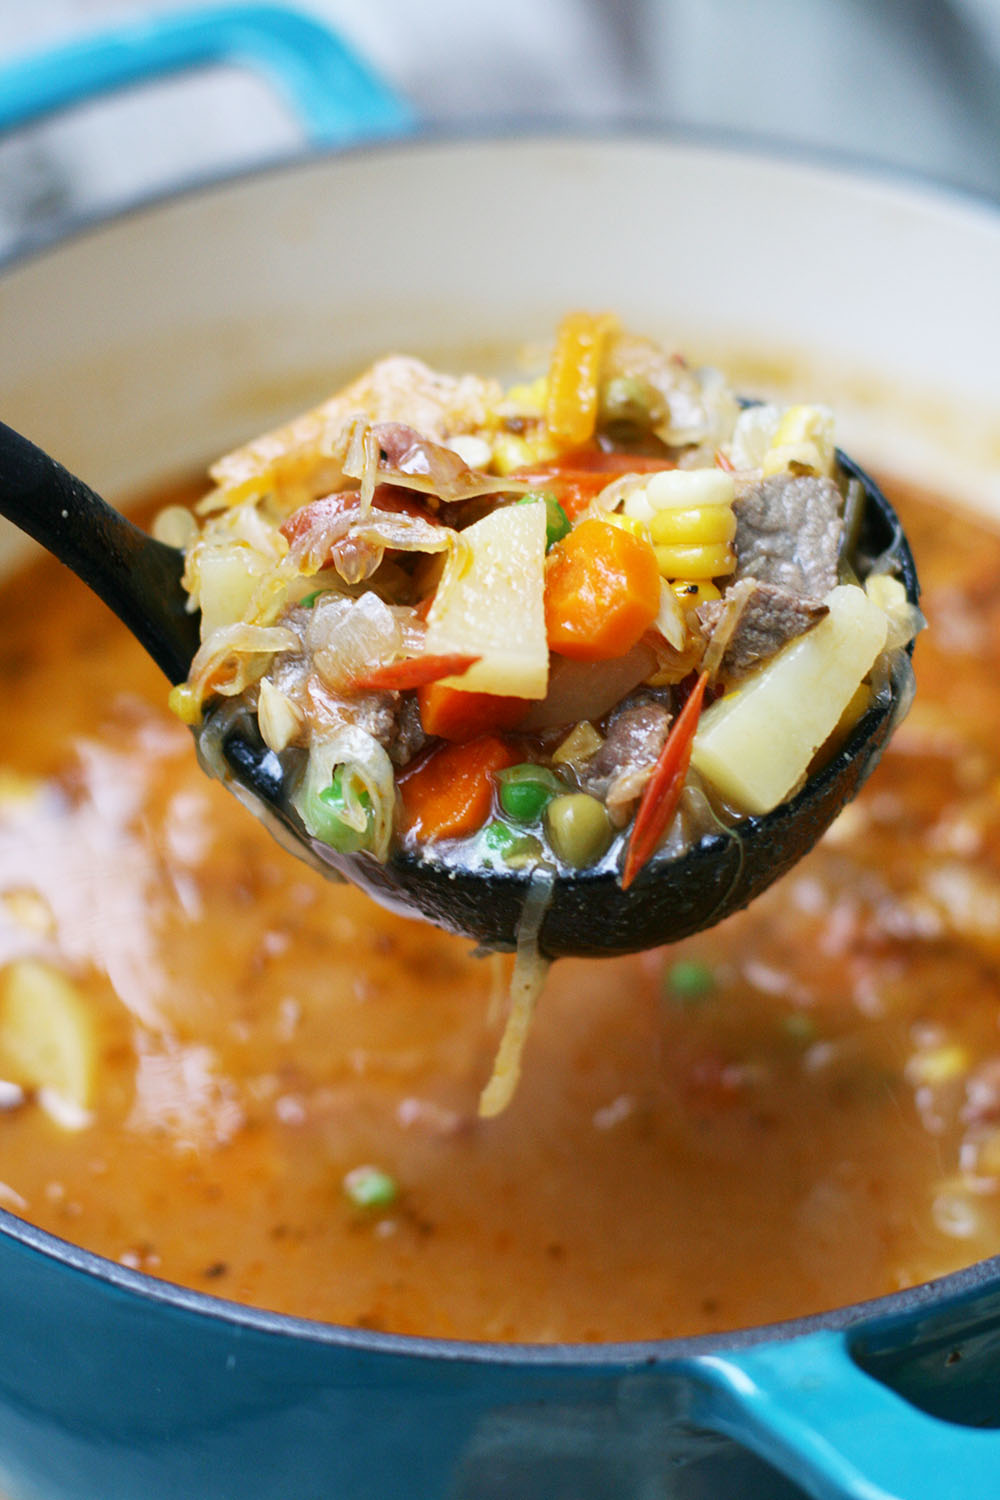 Midwestern booyah stew: Learn how to make this thick, hearty meat and vegetable stew at home.